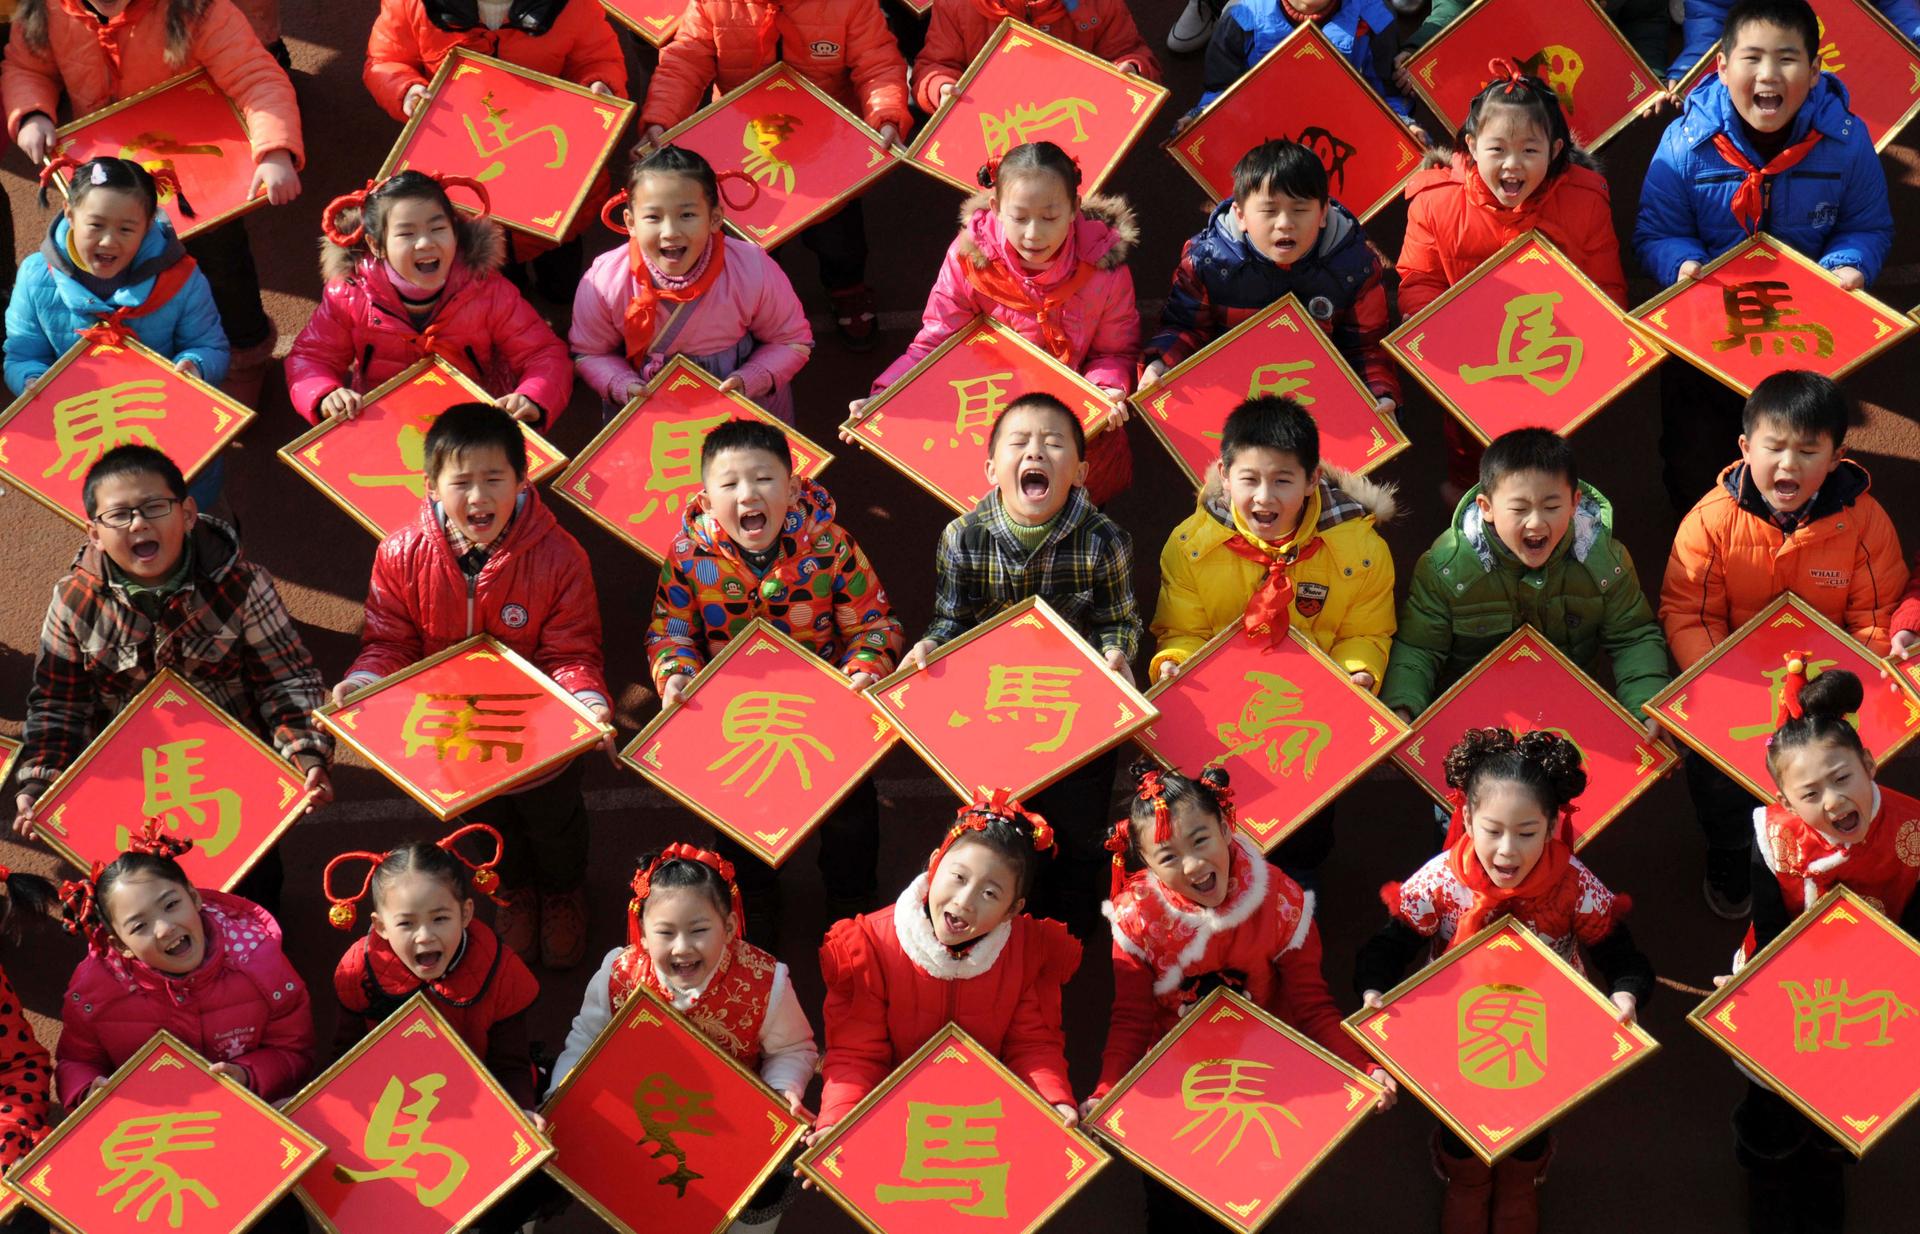 Children pose with their paper-cut works of the Chinese character for "horse", ahead of the Year of the Horse in Chinese zodiac, at a primary school in Jiujiang, Jiangxi province, December 31, 2013.